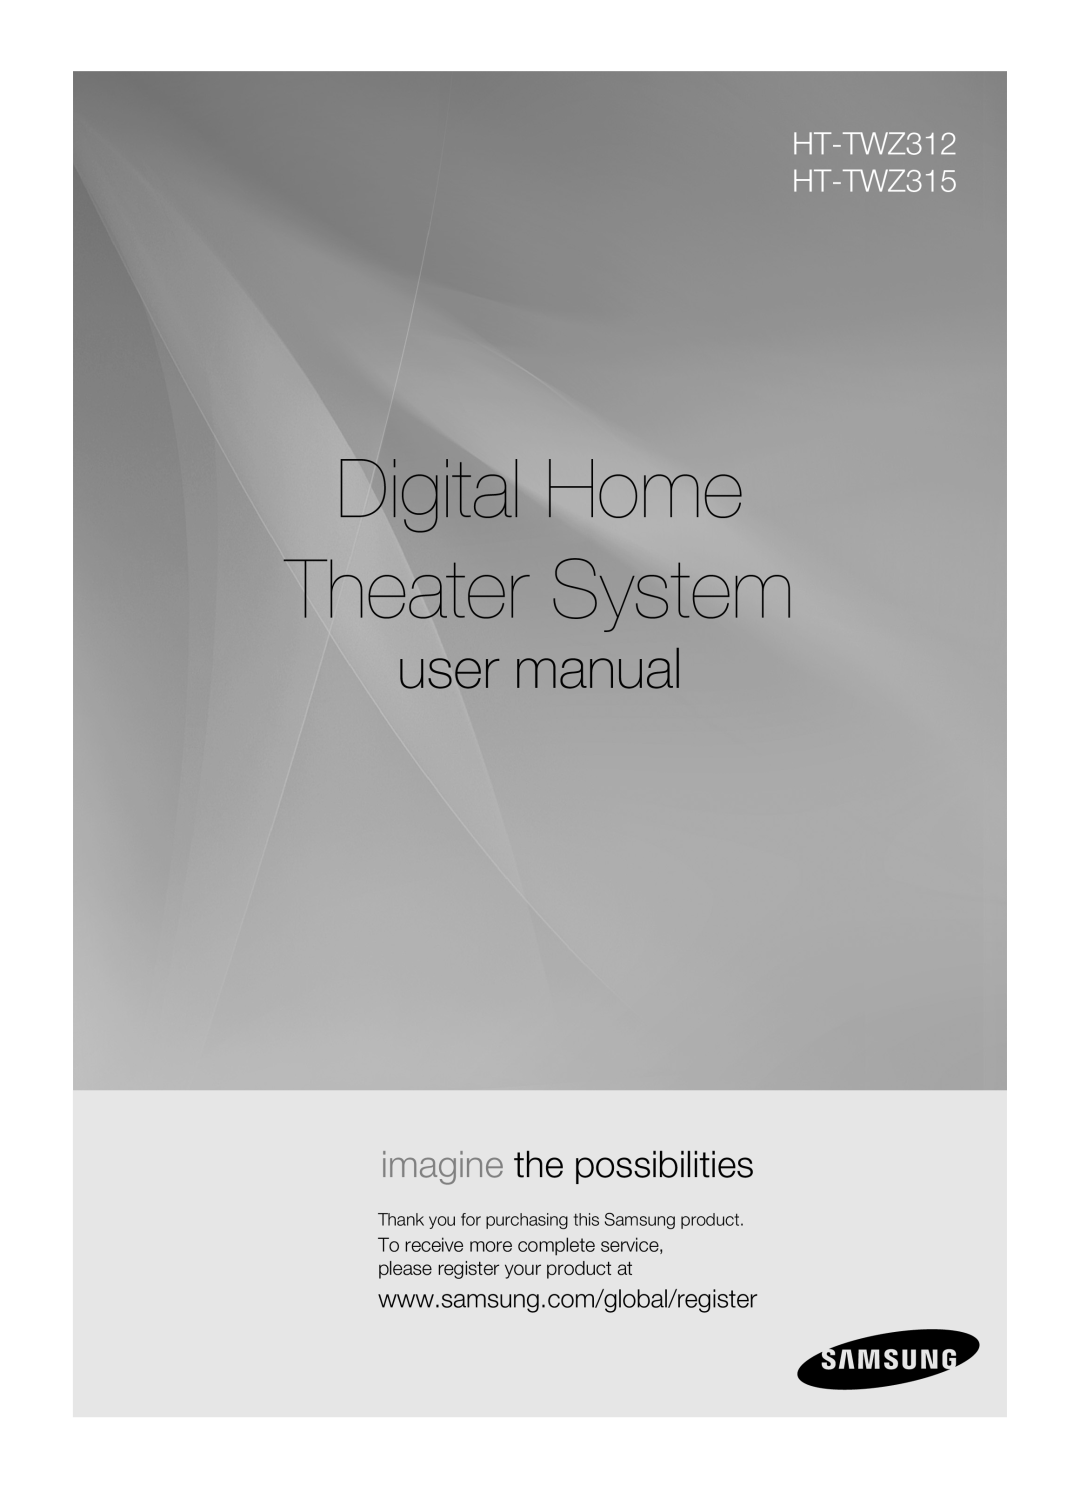 Samsung manual Digital Home Theater System, imagine the possibilities, HT-TWZ312 HT-TWZ315 